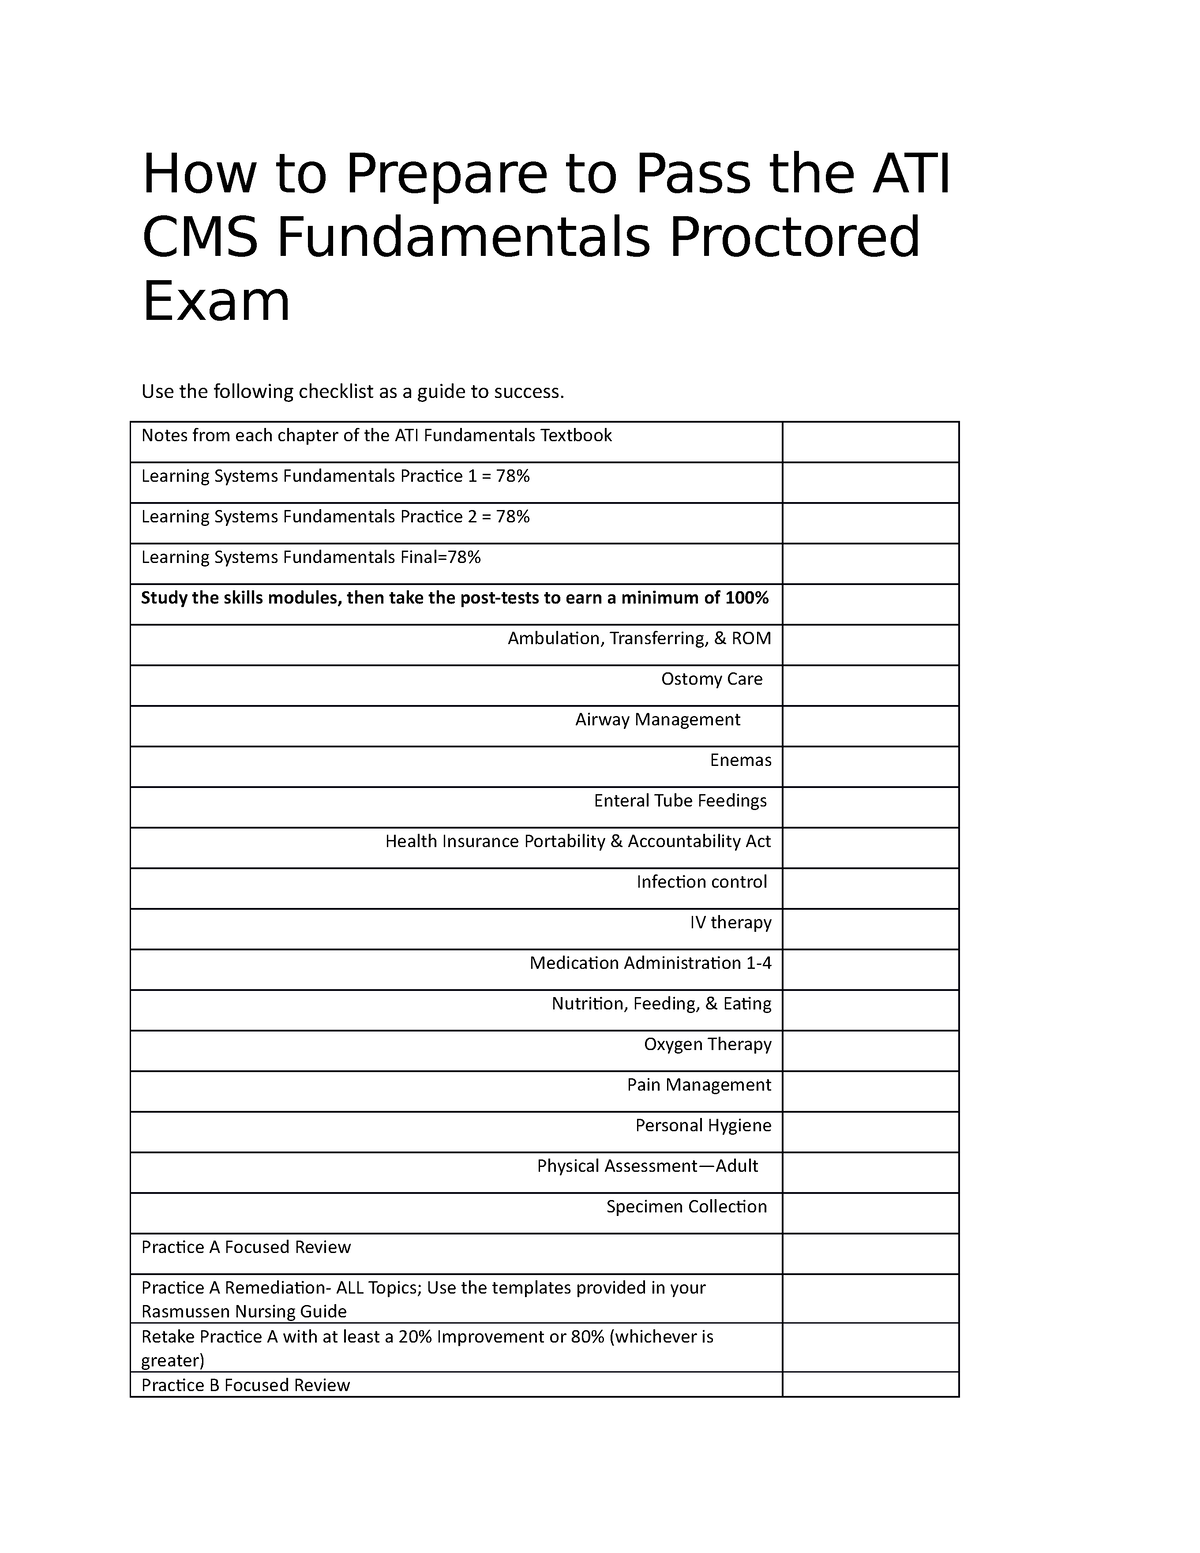 Preparing to Pass the ATI CMS Fundamentals Proctored Exam How to